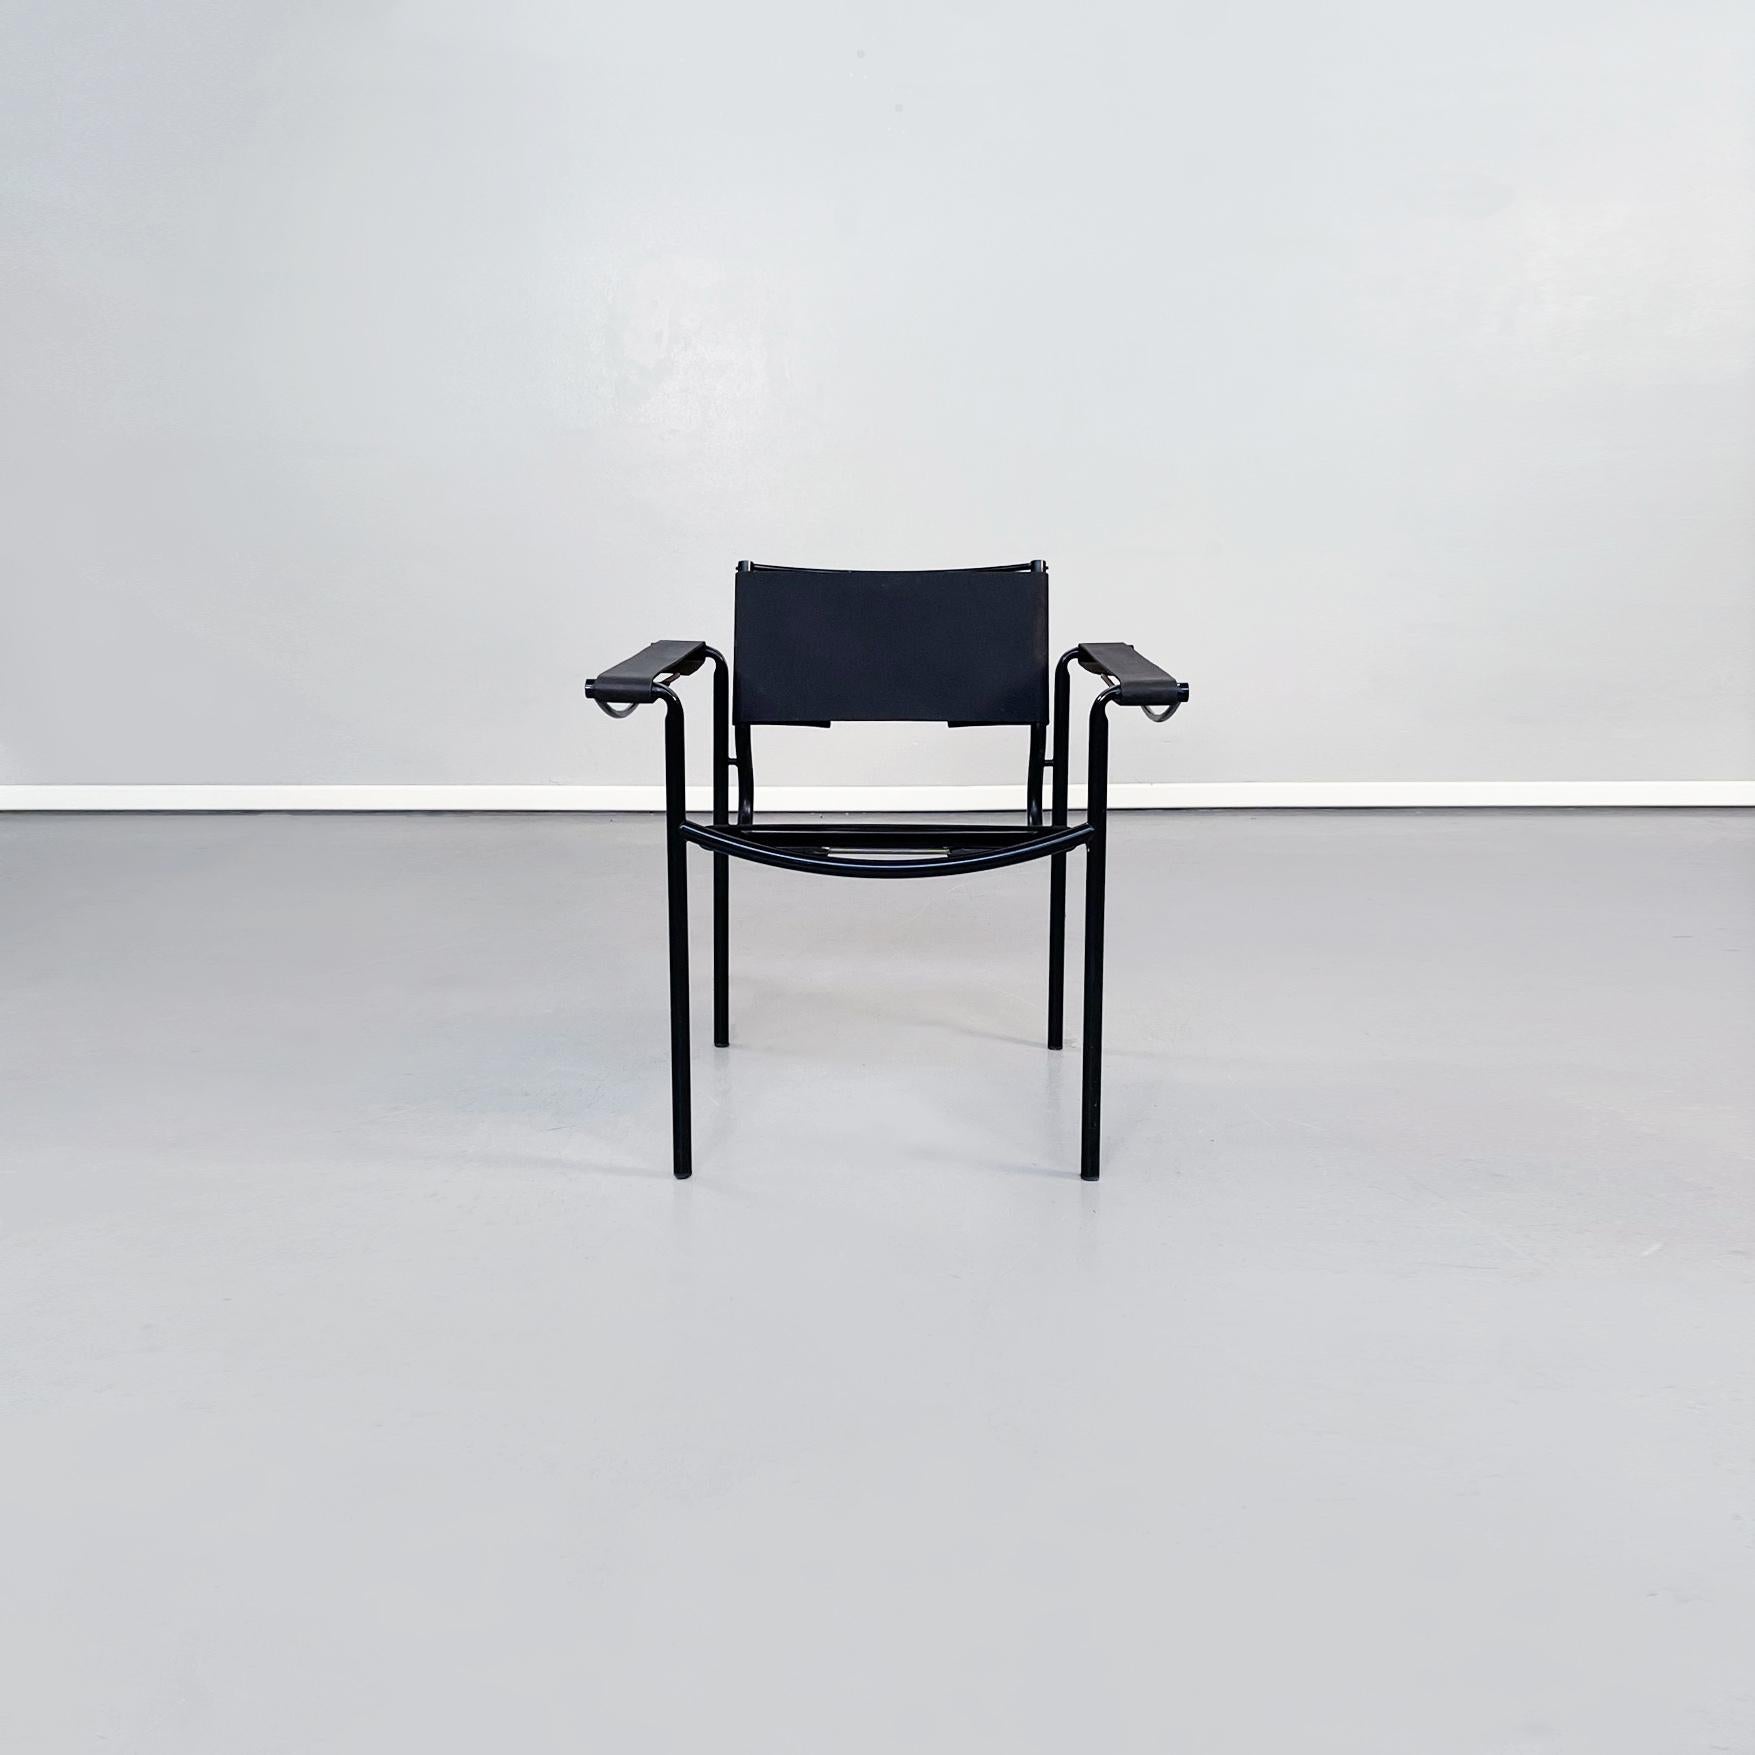 Italian mid-century black leather spaghetti armchairs by Belotti for Alias, 1980s.
Trio of spaghetti armchairs with square seat and back in black ecological leather. The structure is in black painted metal.
Produced by Alias Design in 1980s and